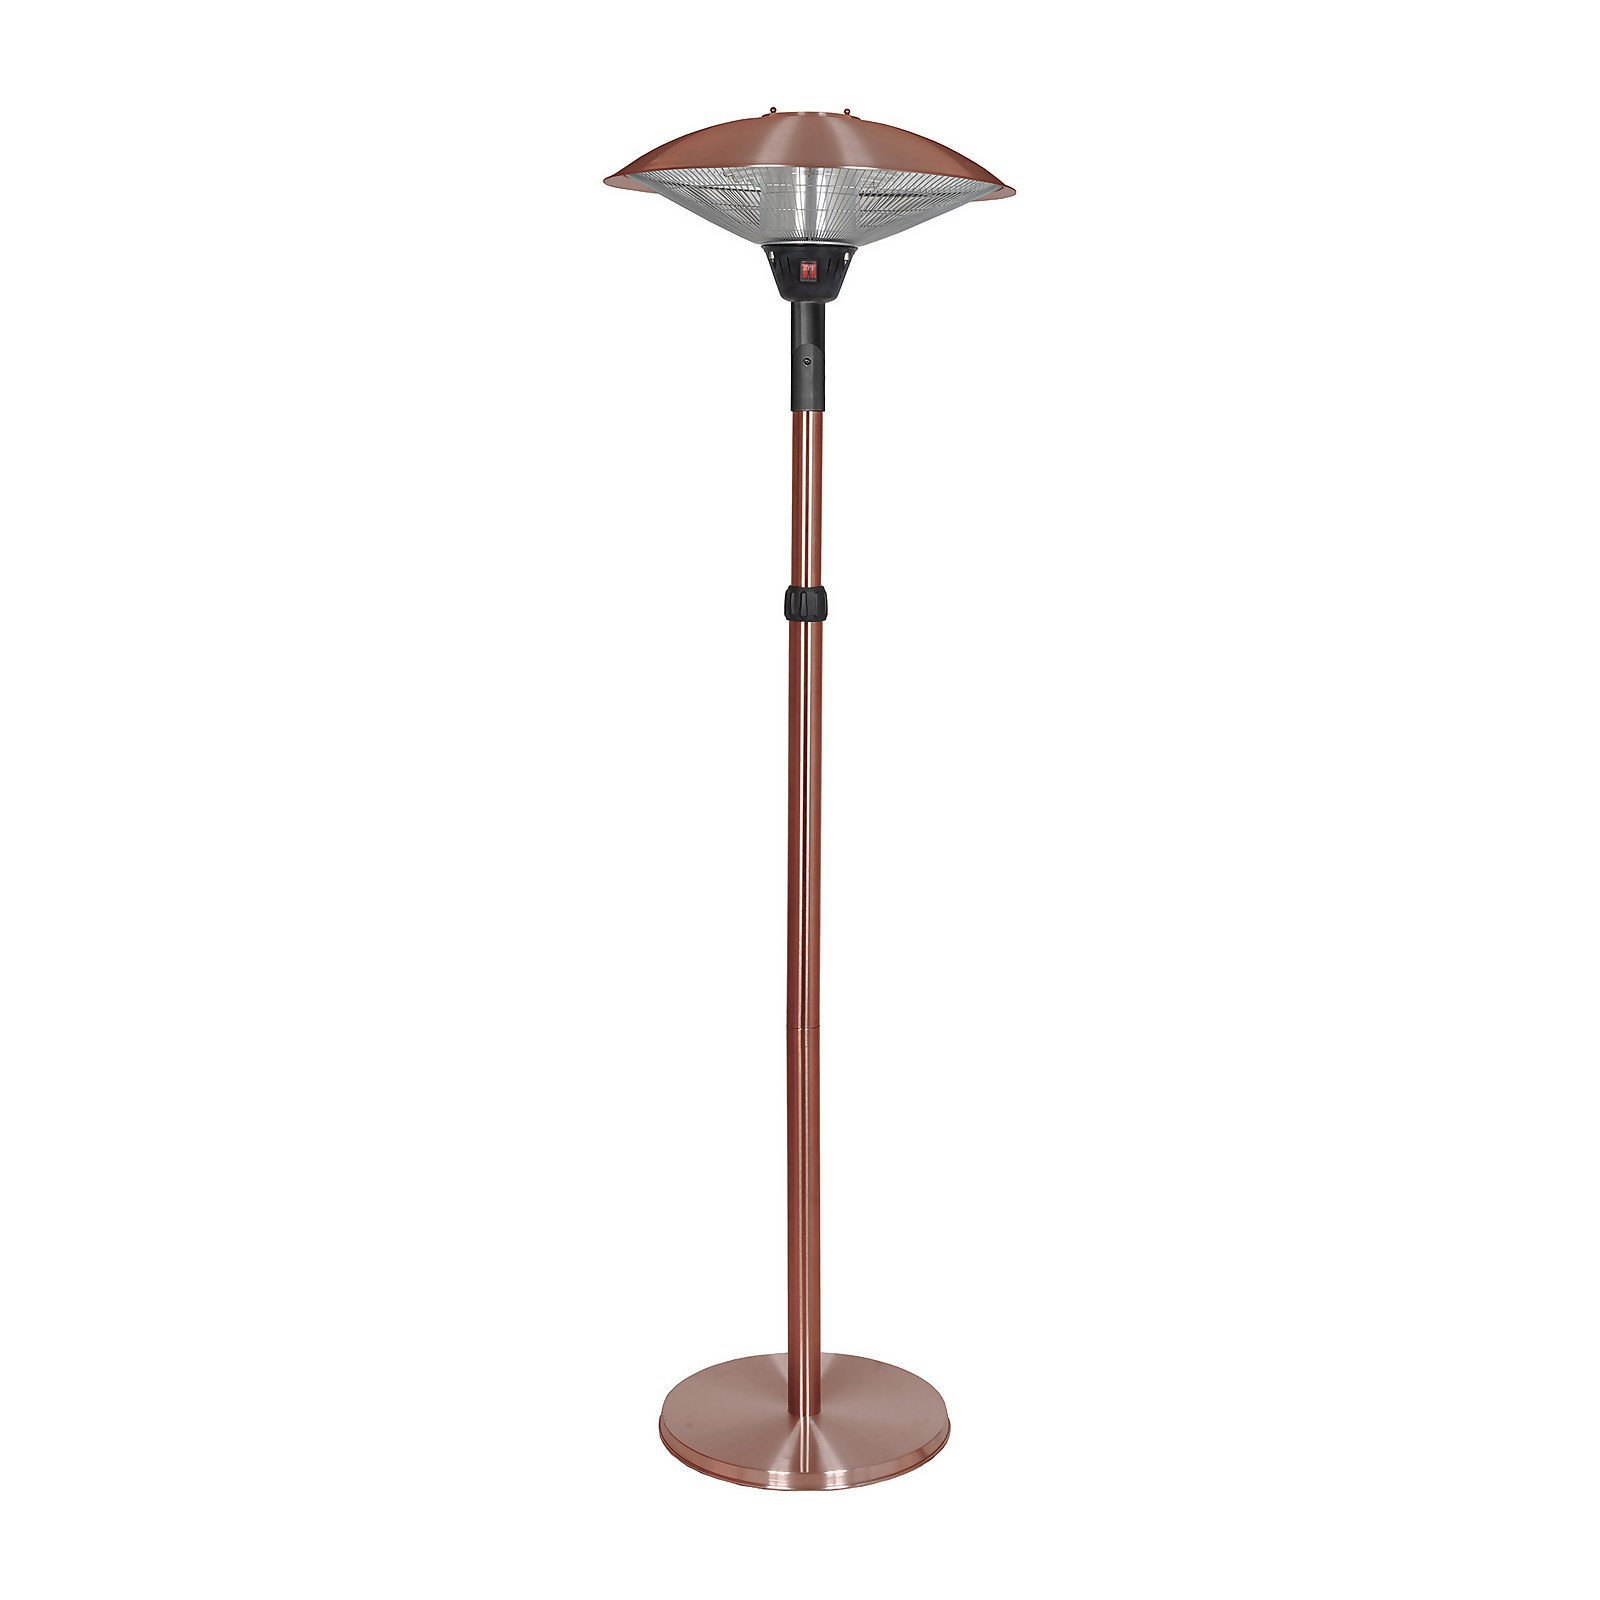 Photo of Copper Electric Freestanding Adjustable Patio Heater